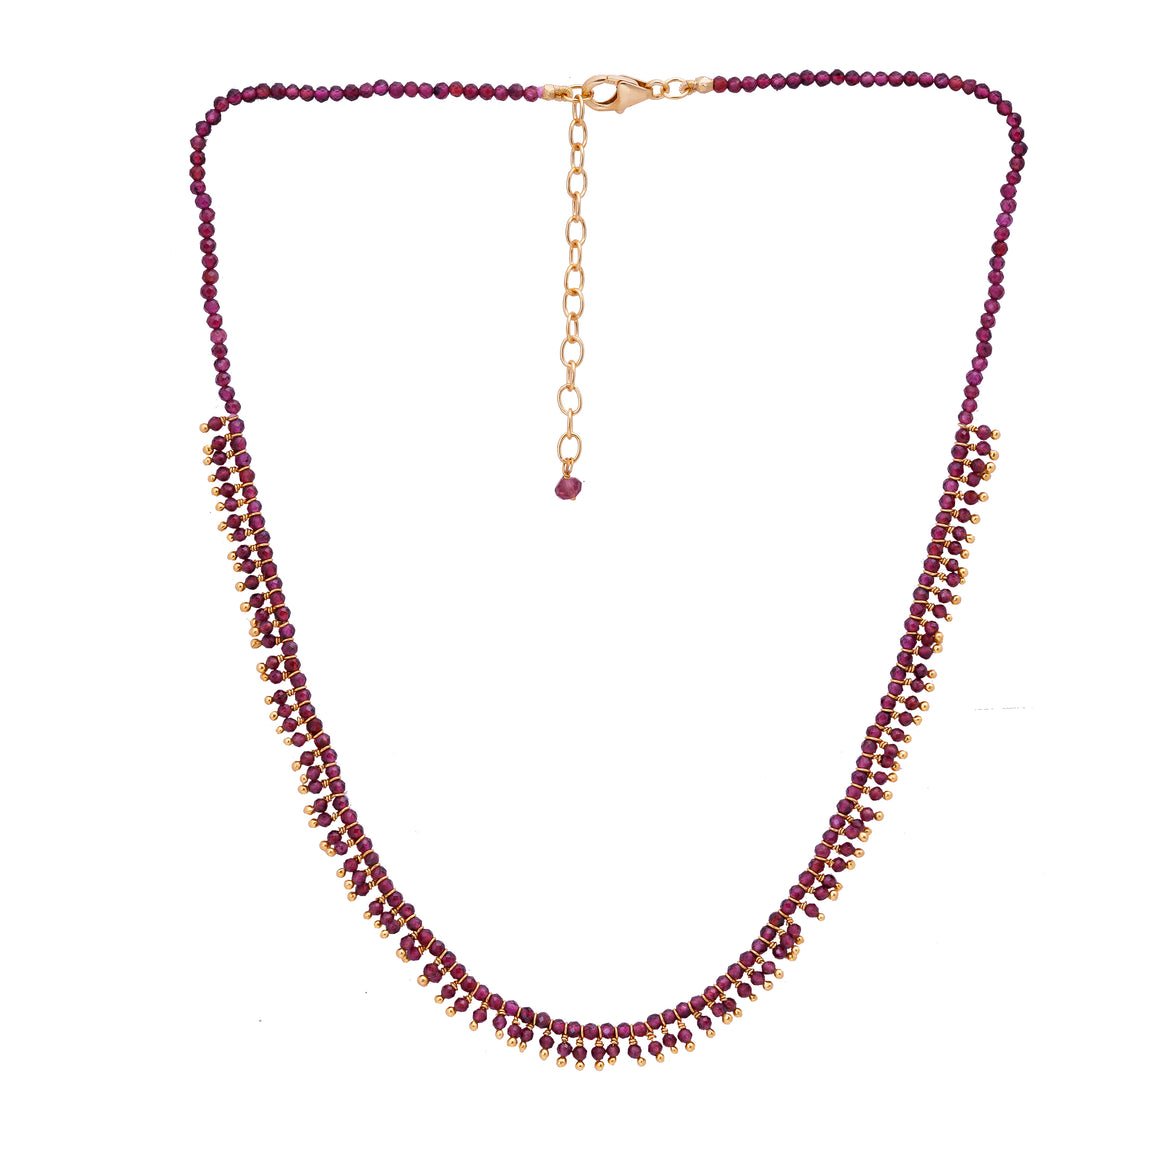 Garnet Beads Accented with Gold Wire & Beads